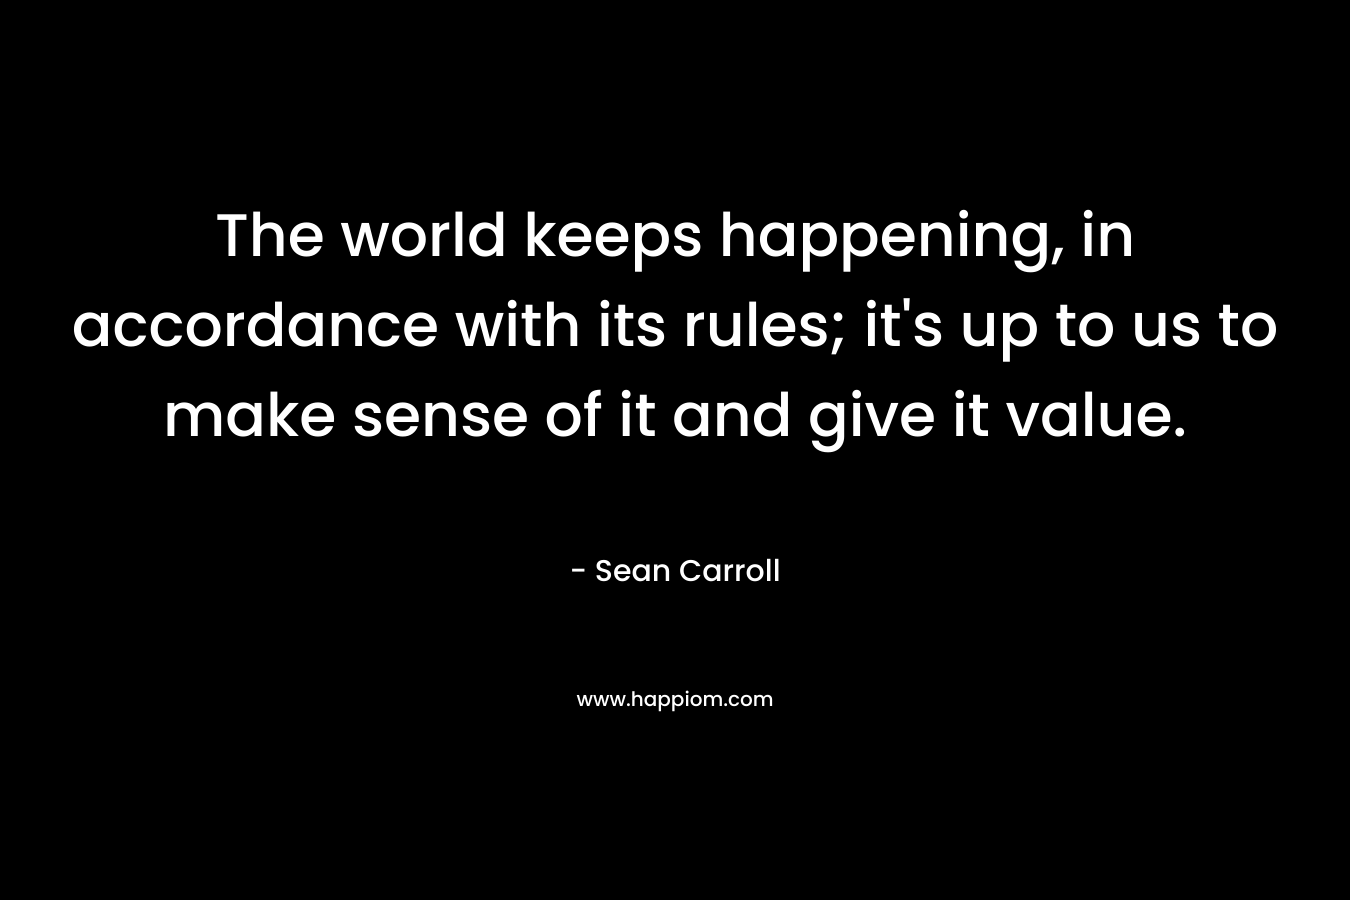 The world keeps happening, in accordance with its rules; it’s up to us to make sense of it and give it value. – Sean Carroll